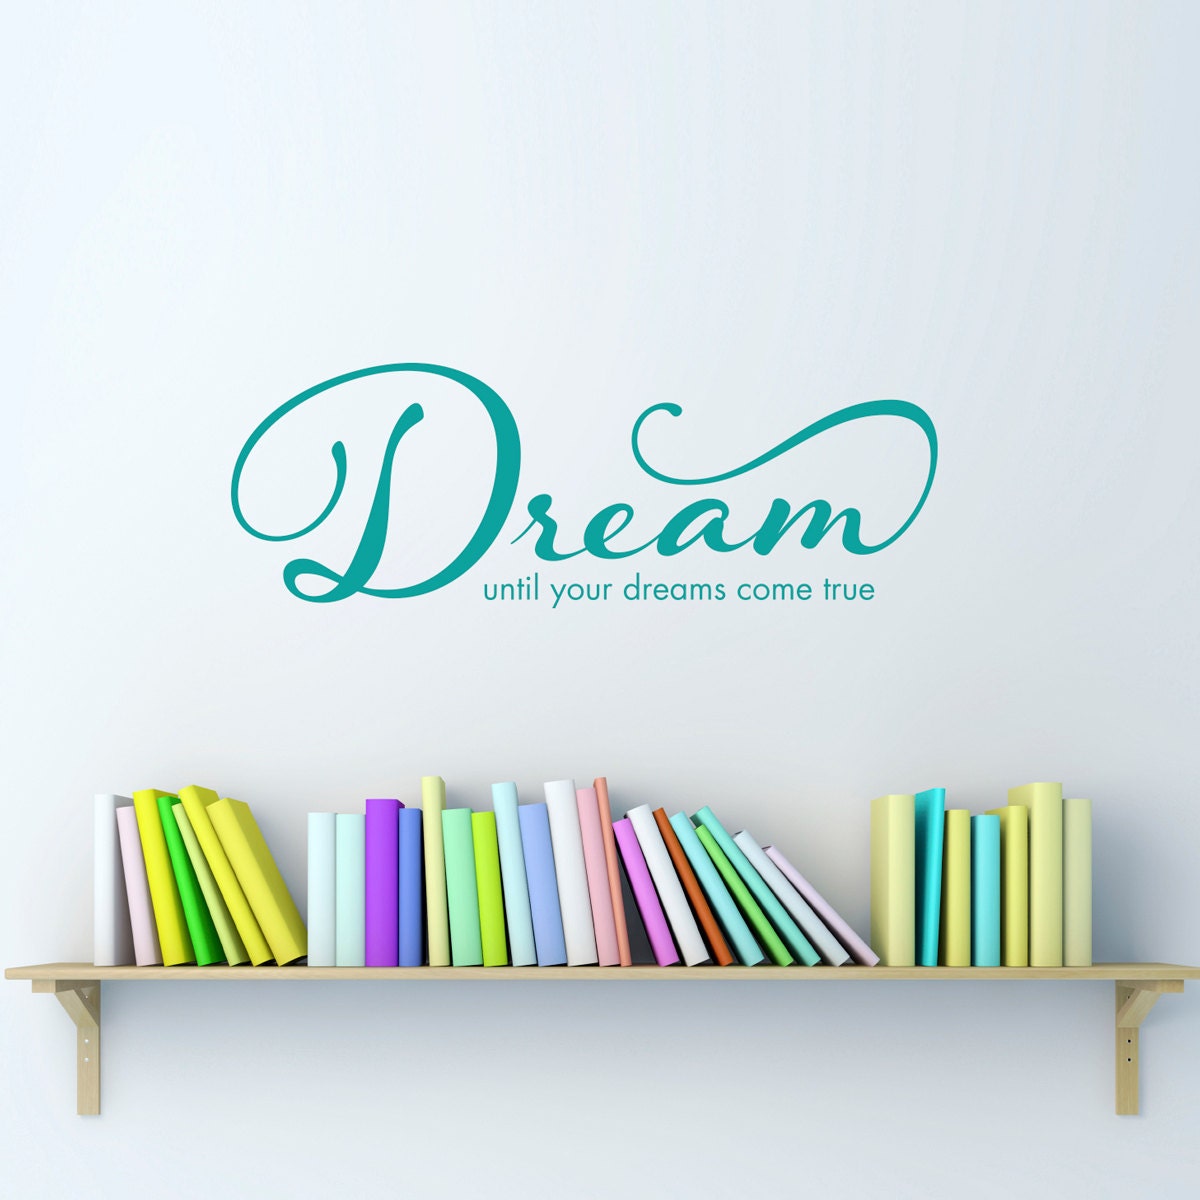 Dream Wall Decal - until your dreams come true Quote Decal - Medium